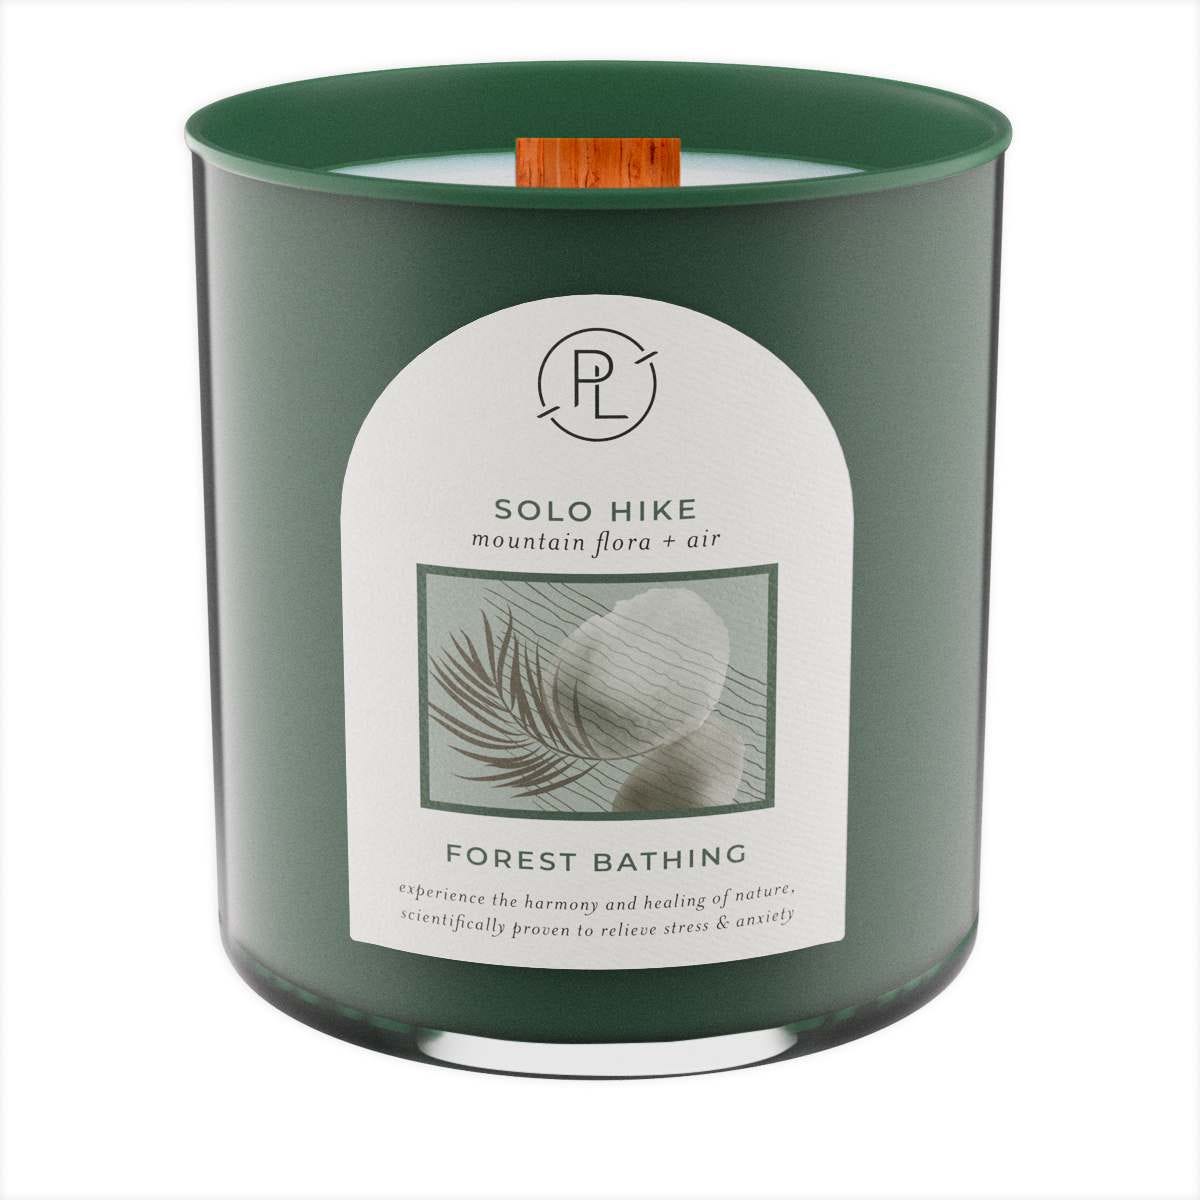 Solo Hike: mountain flora + air Jar Candle - PartyLite US